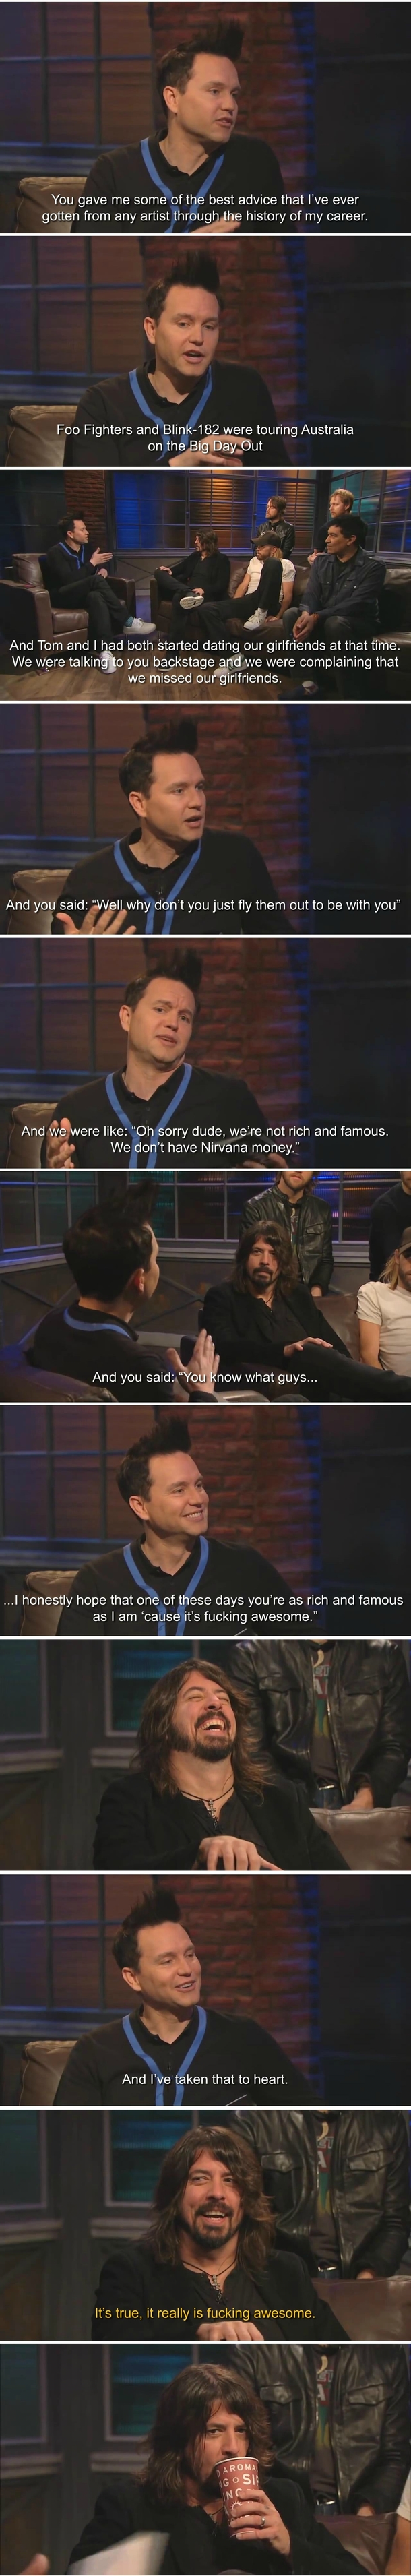 Life advice from Dave Grohl